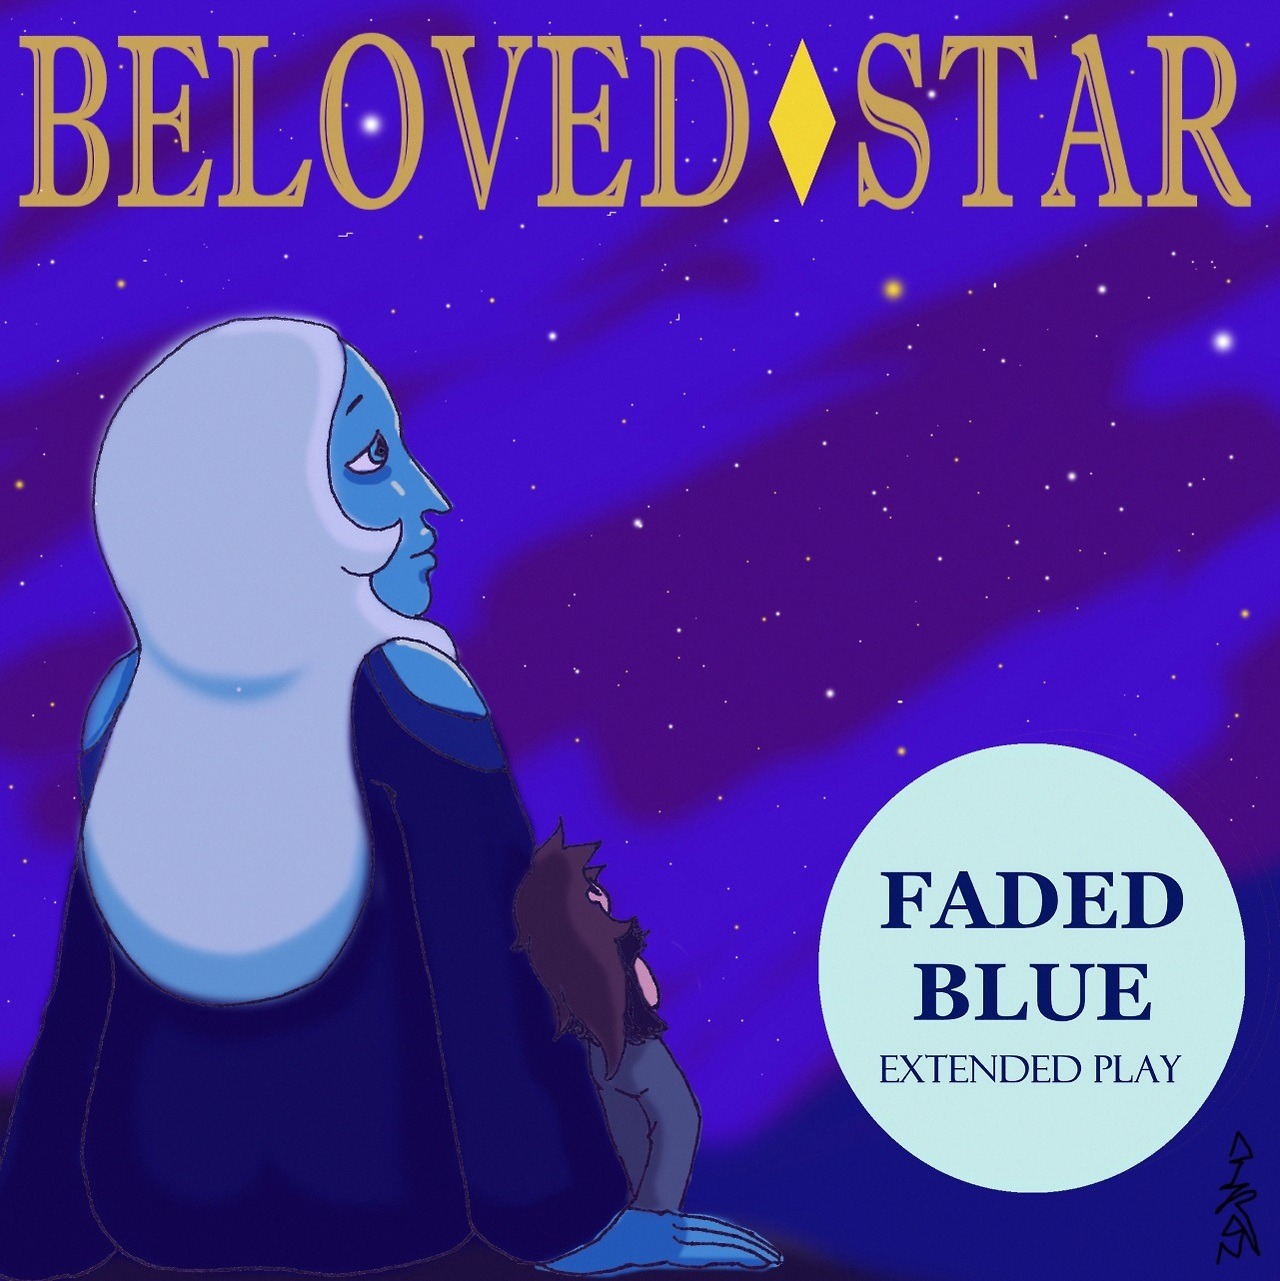 Here’s the ‘Faded Blue: Extended Play’ cover-art for you all, draw by our very own @run-on-lightning/AiramCG.